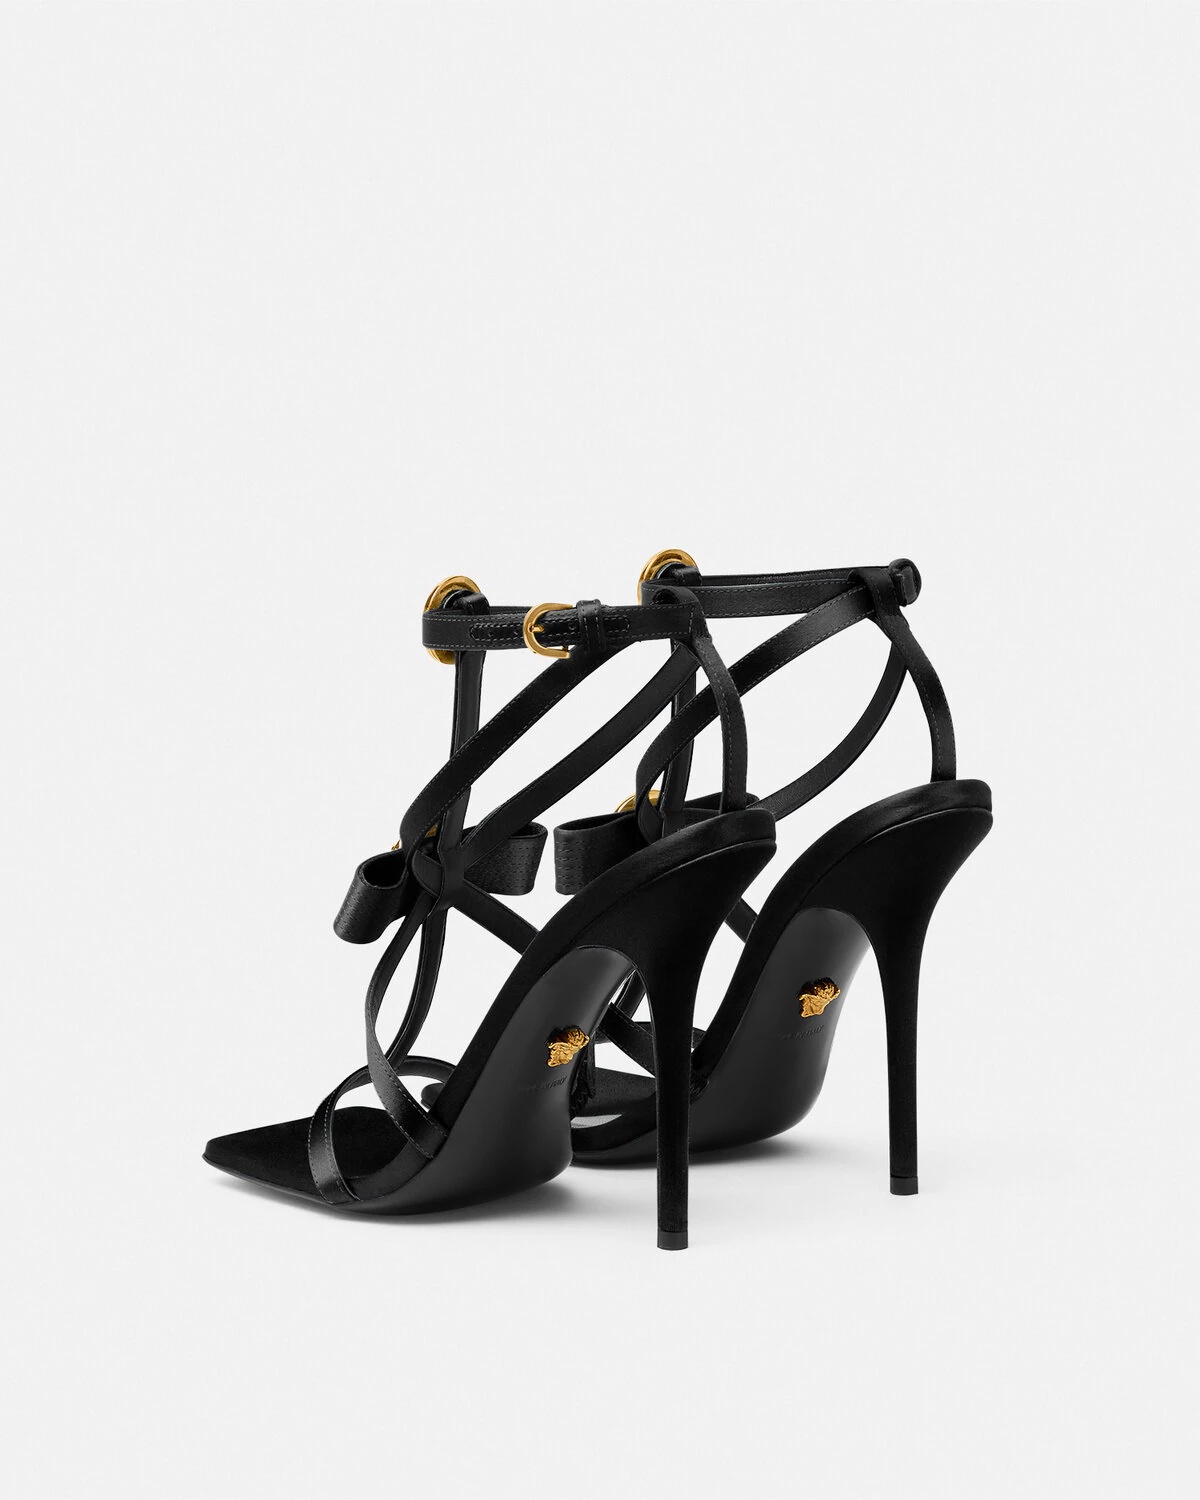 Gianni Ribbon Satin Cage Sandals 110 mm - 4